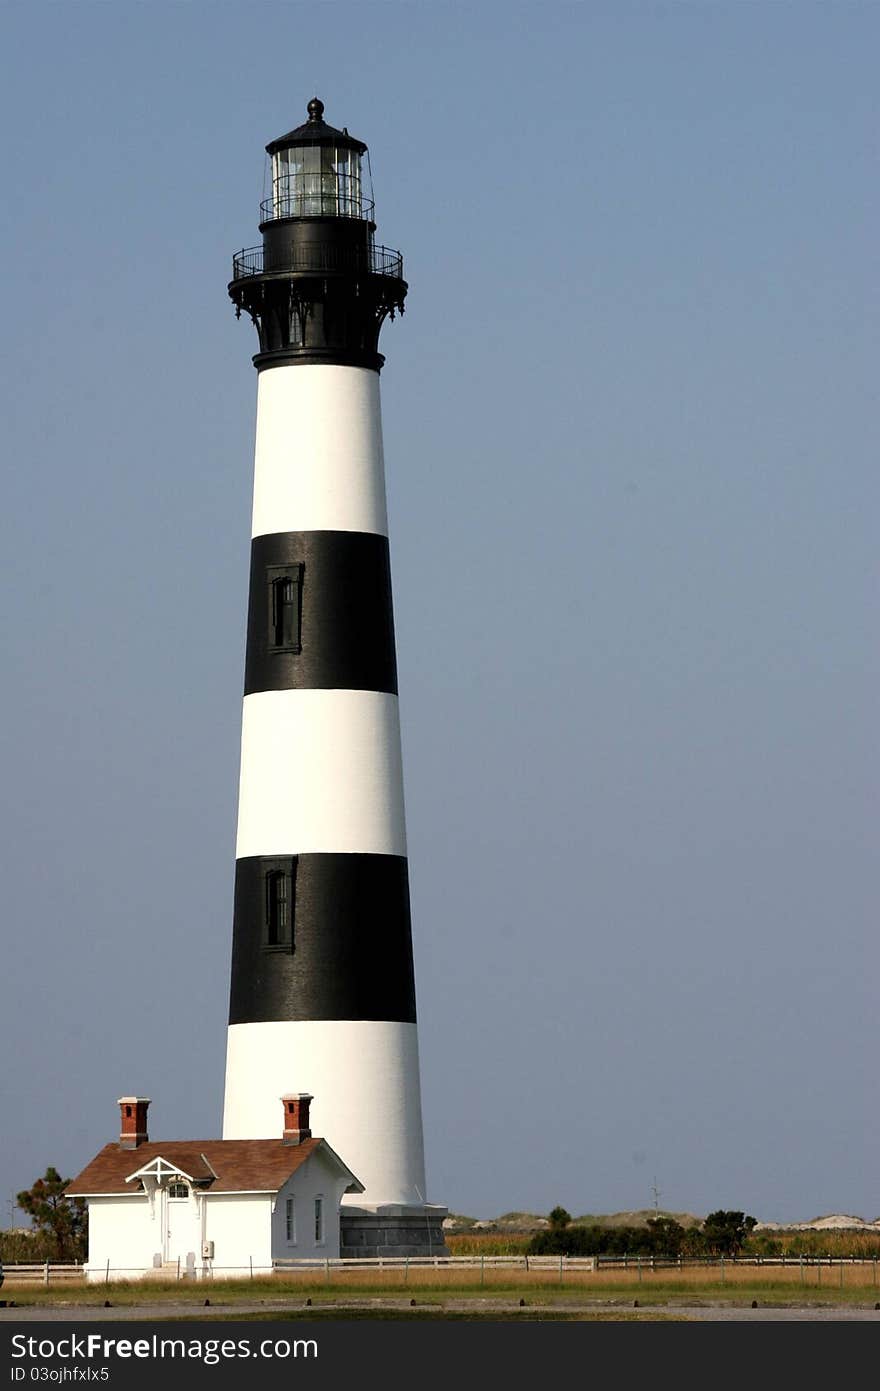 Black and White striped lighthouse against gray-blue sky, no clouds. Black and White striped lighthouse against gray-blue sky, no clouds